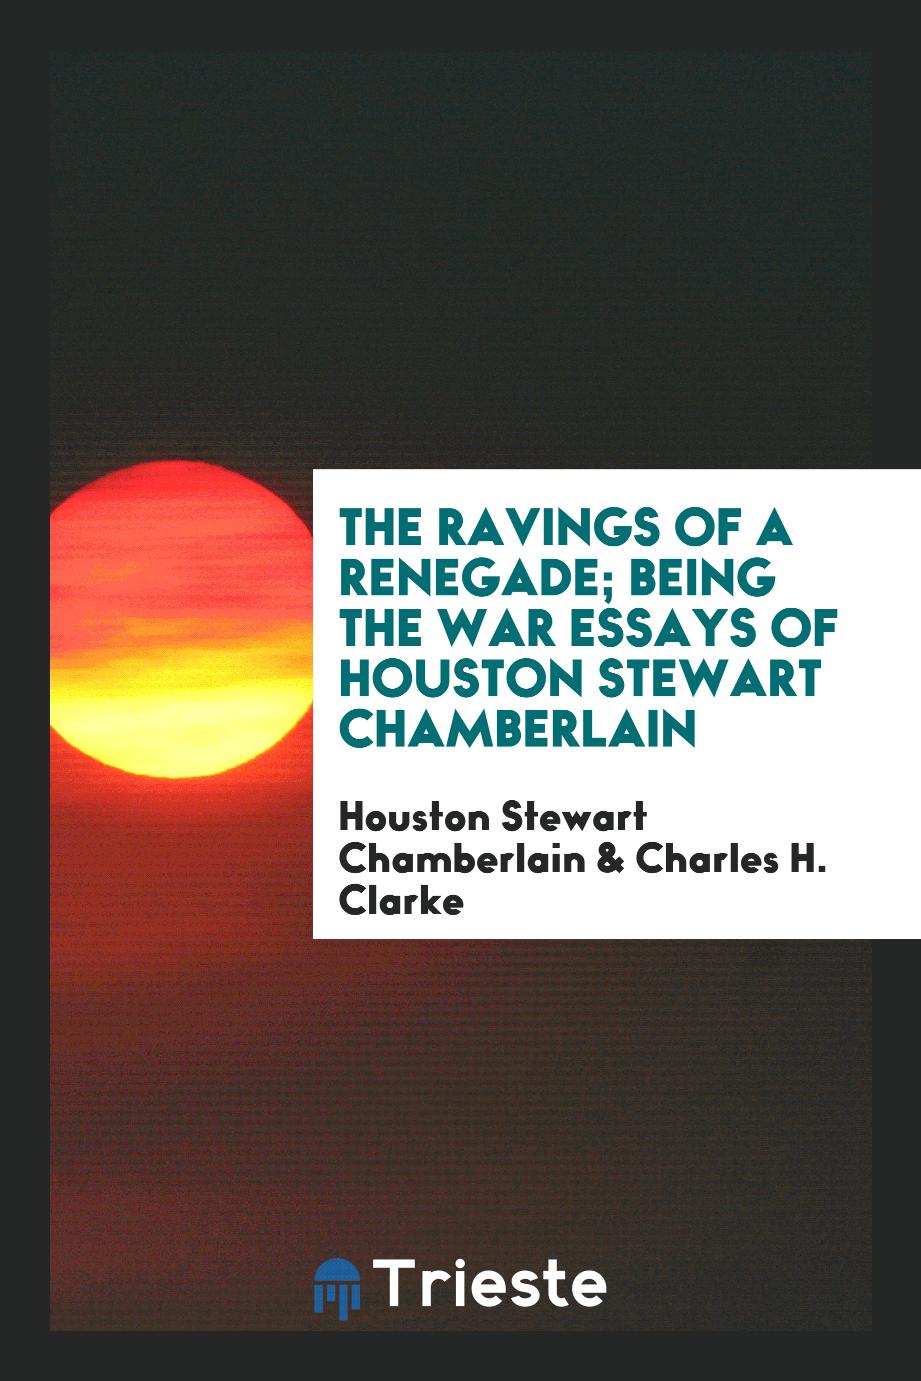 The ravings of a renegade; being the War essays of Houston Stewart Chamberlain